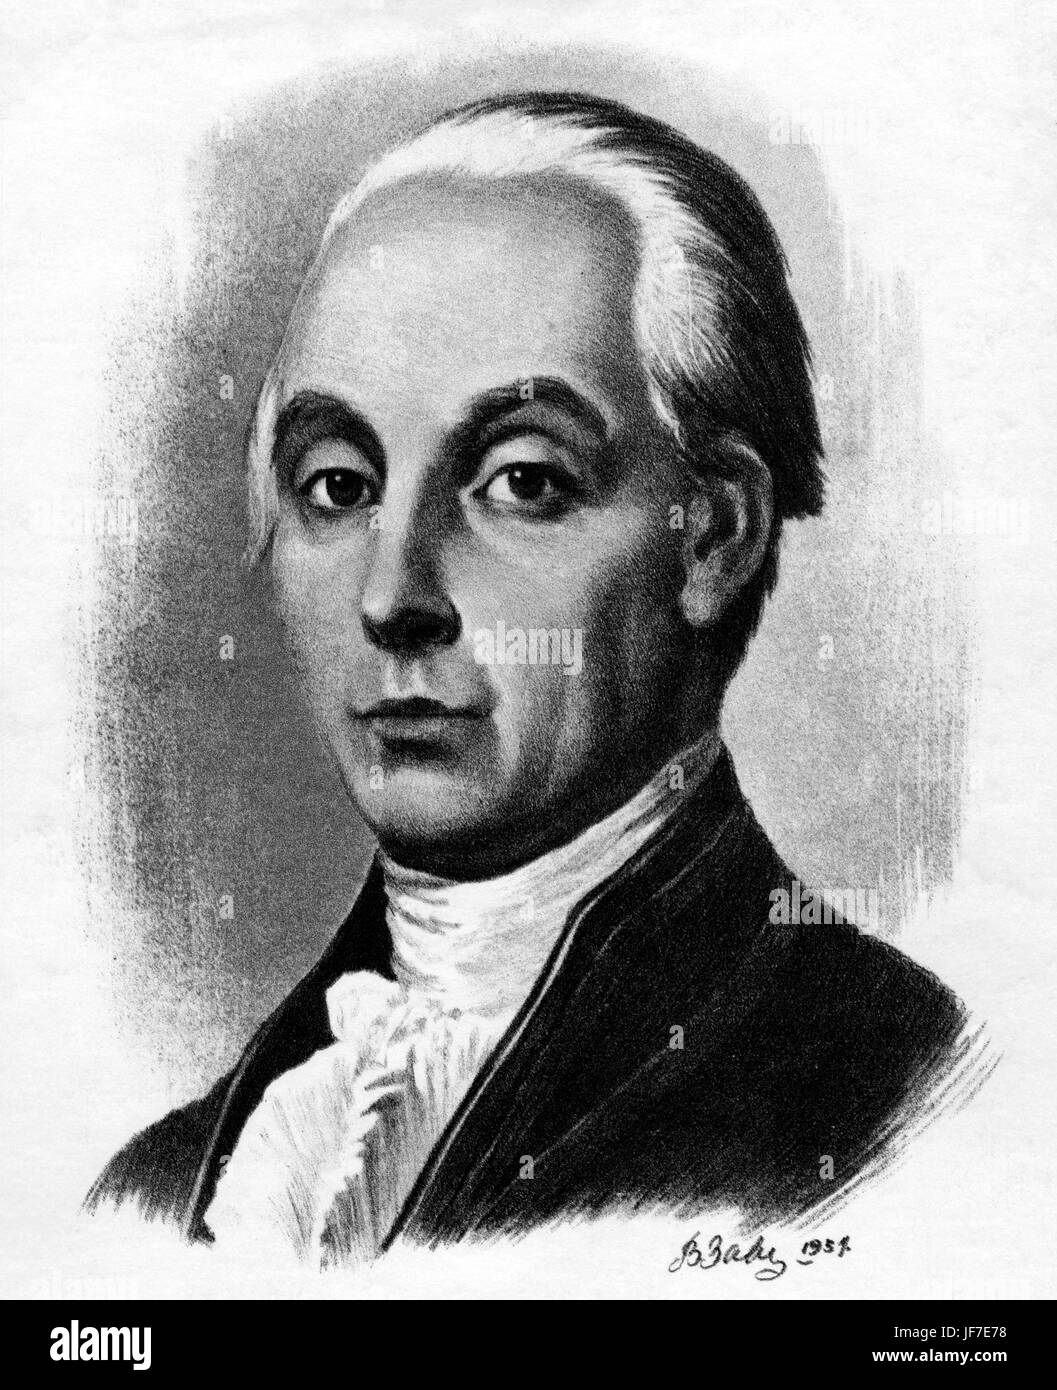 Alexander Nikolaevich Radishchev - portrait of the Russian author and social critic 20 August 1749 - 12 September 1802.  Author of A Journey from St. Petersburg to Moscow. (Radishev incorrect spelling) Stock Photo